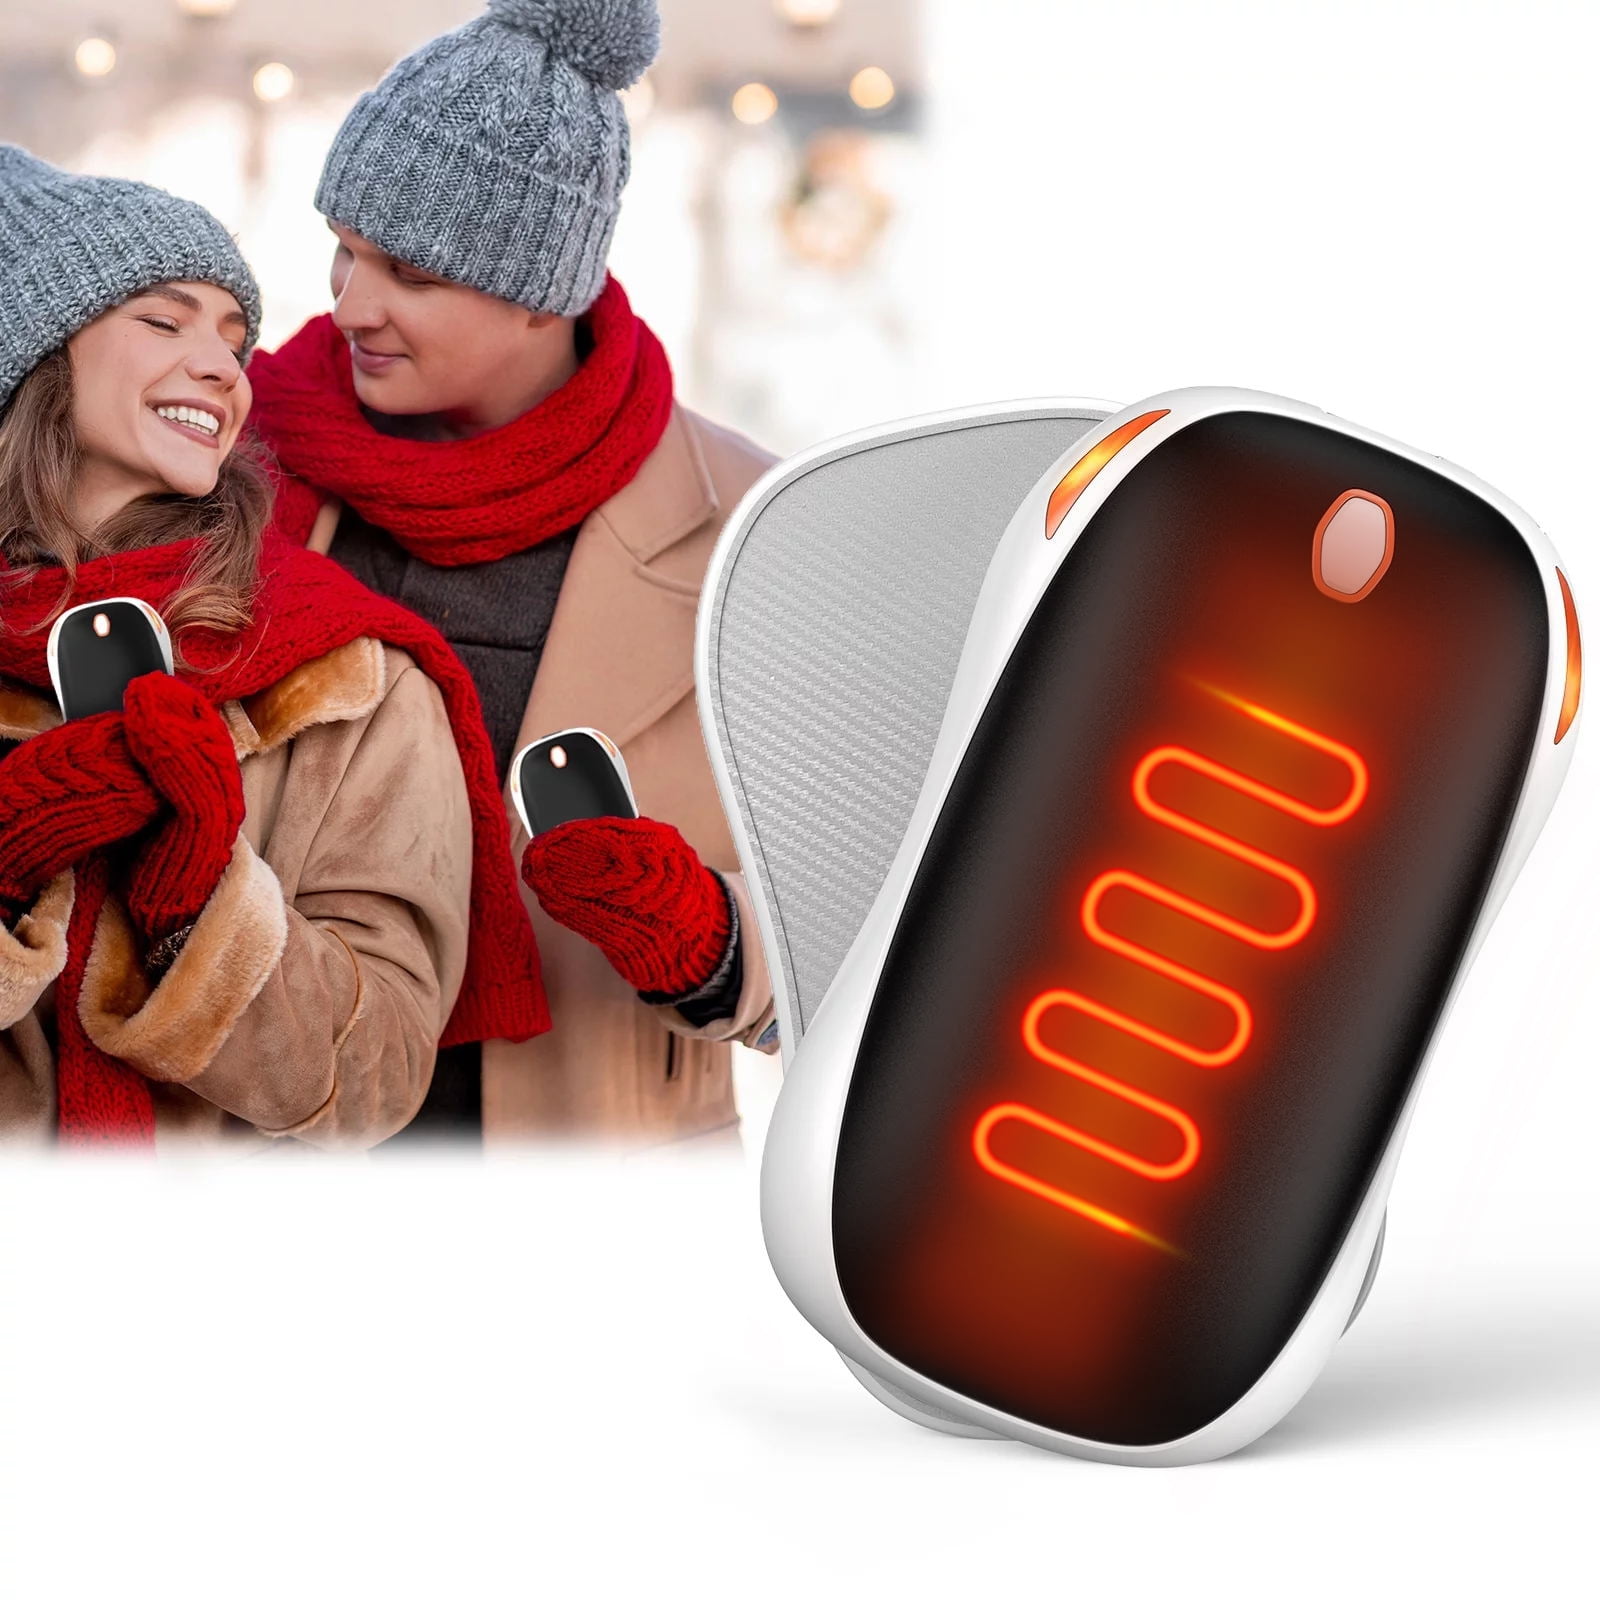 Rechargeable Hand Warmers 2 Pack, Meromore Magnetic Electric Hand Warmers  with 10000 mAh, 3 Heat Setting, 16 Hrs Warmth for Outdoors, Hunting,  Camping, Best Gifts for Men Women, Raynaud 